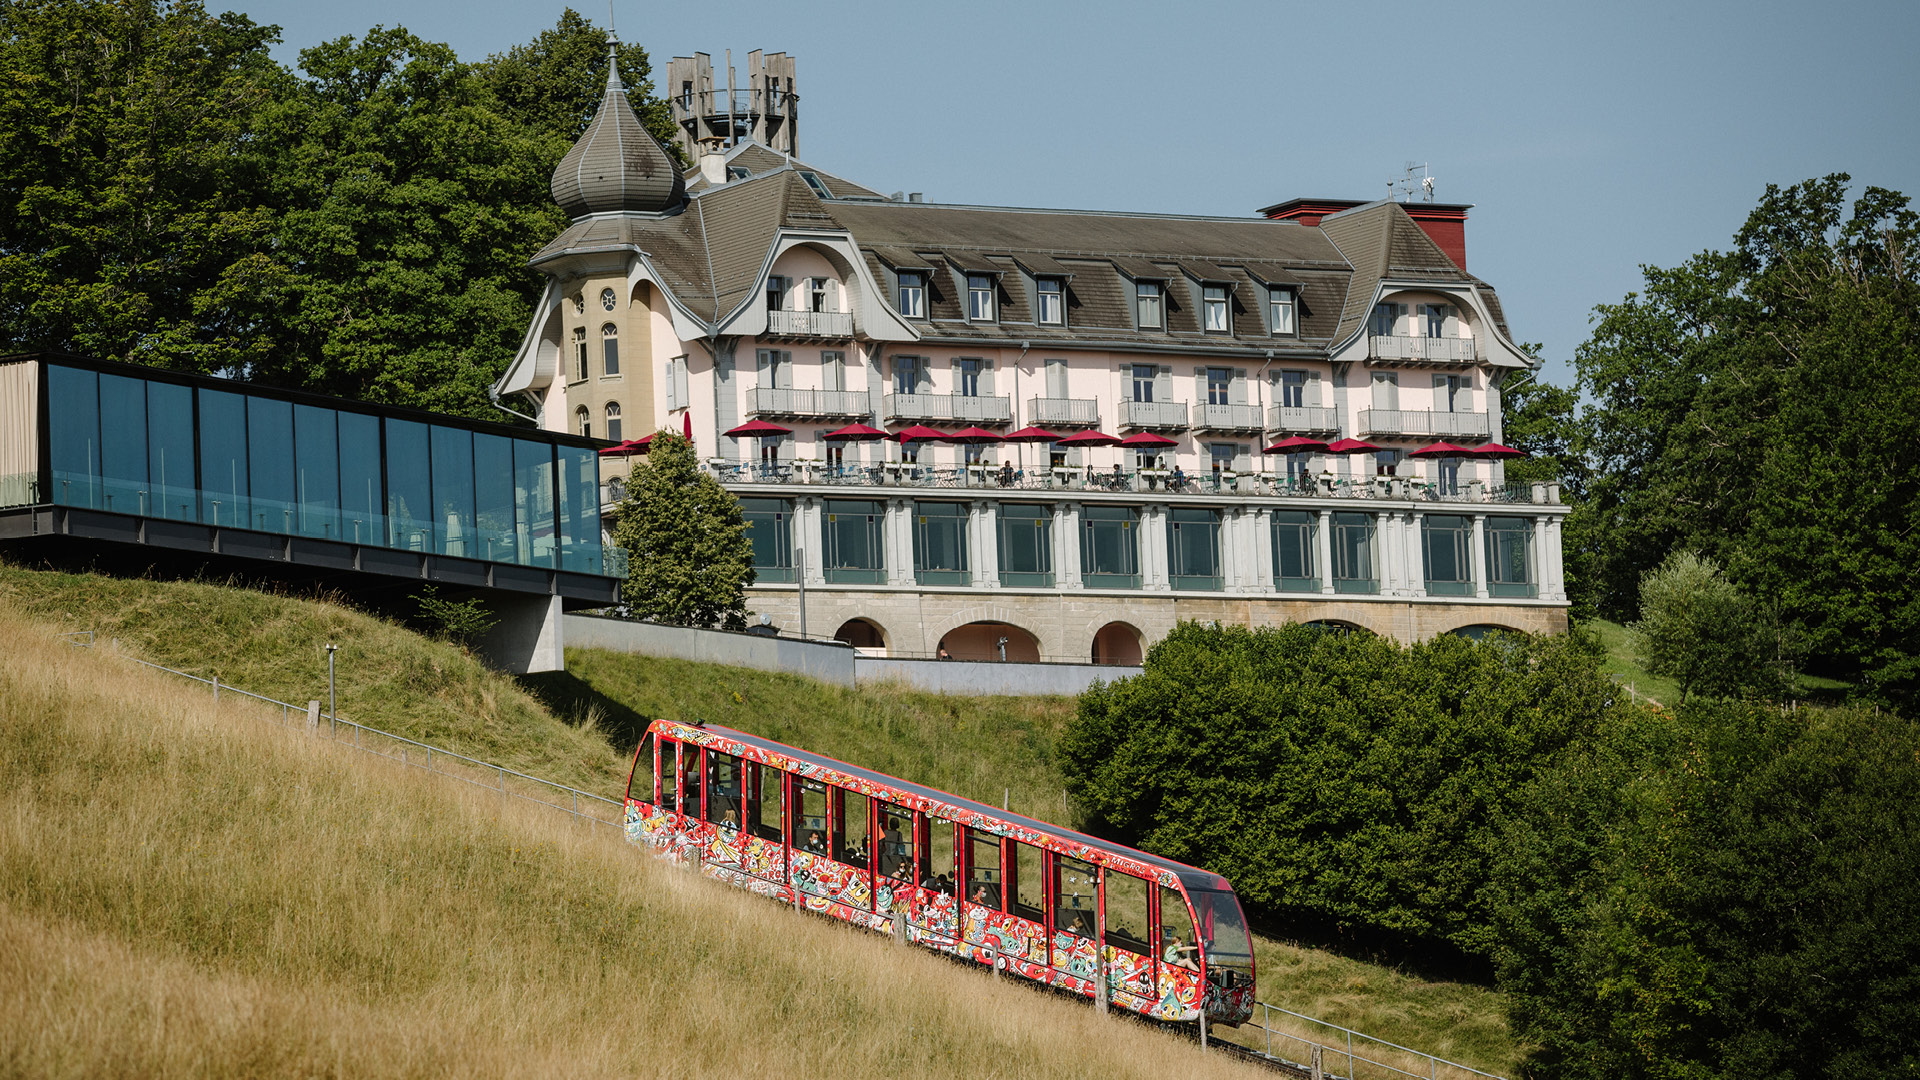 The Gurten funicular travels up the Gurten every 15 minutes. In the background is the Kulm building and the observation tower.